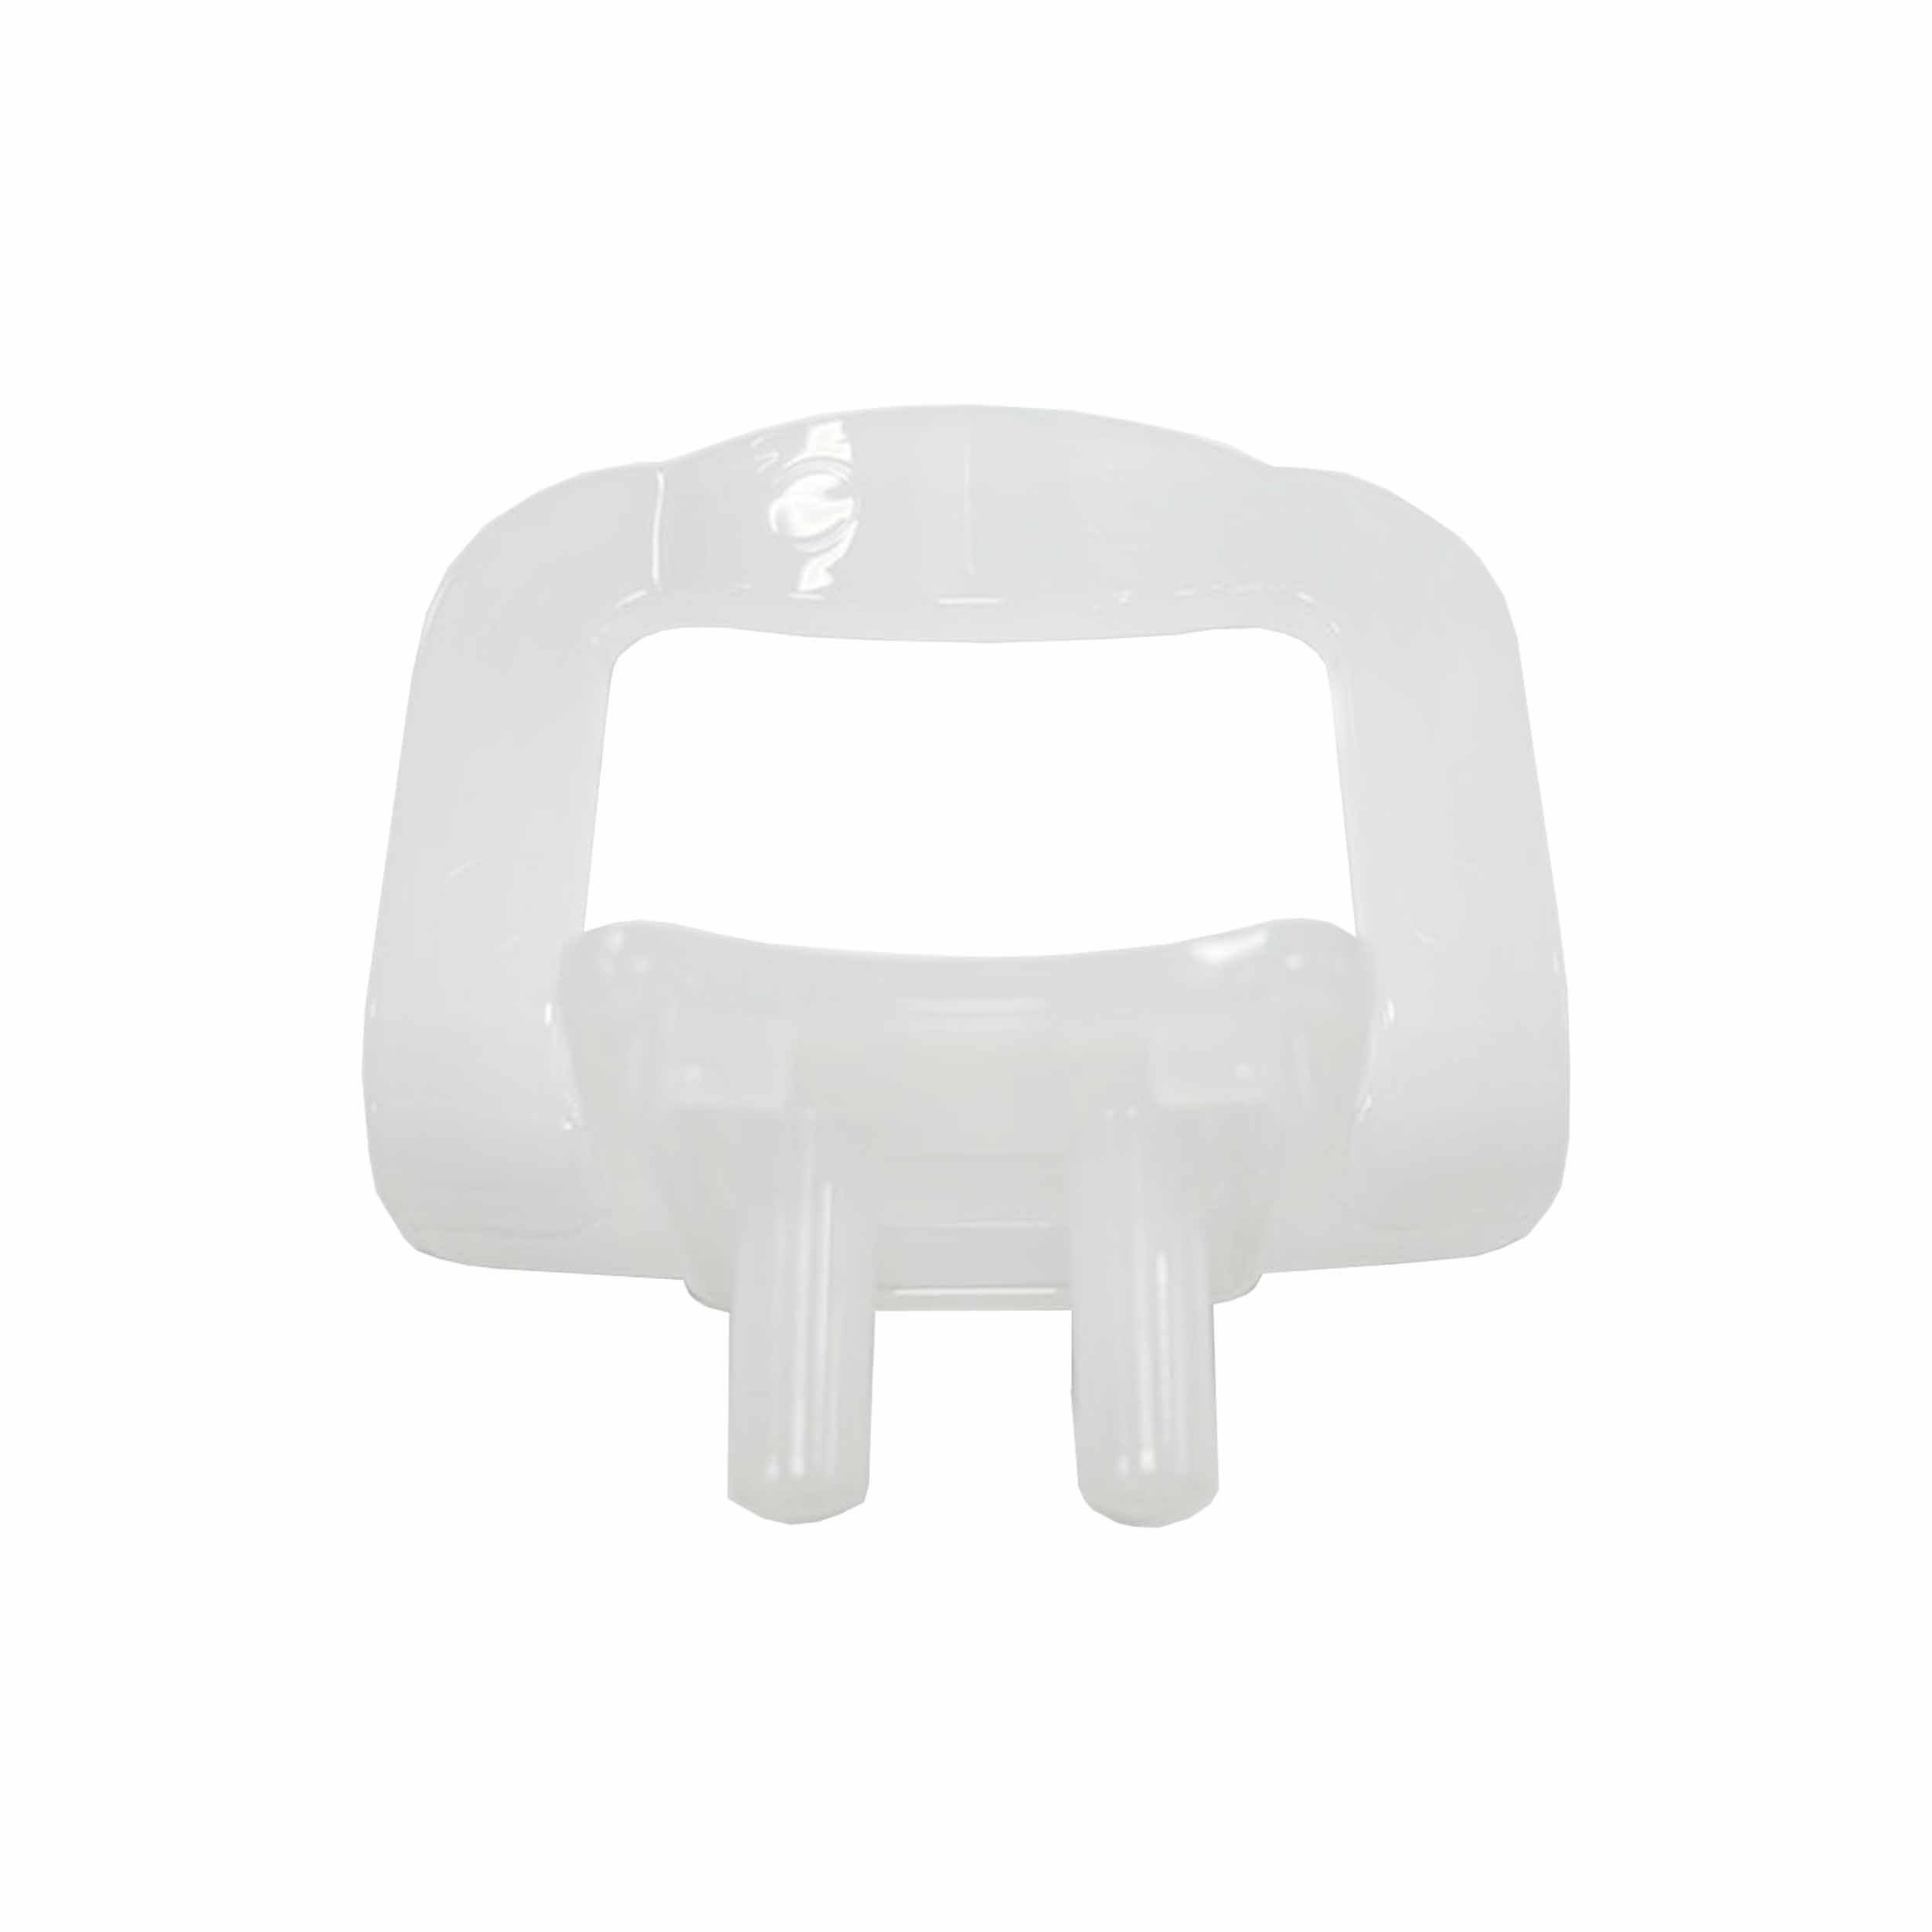 Tmj/Sinus Chinrest (M0400420 Cover-Accessories Sinus Chinrest -A/Pc-Clear Gray/M0028884)